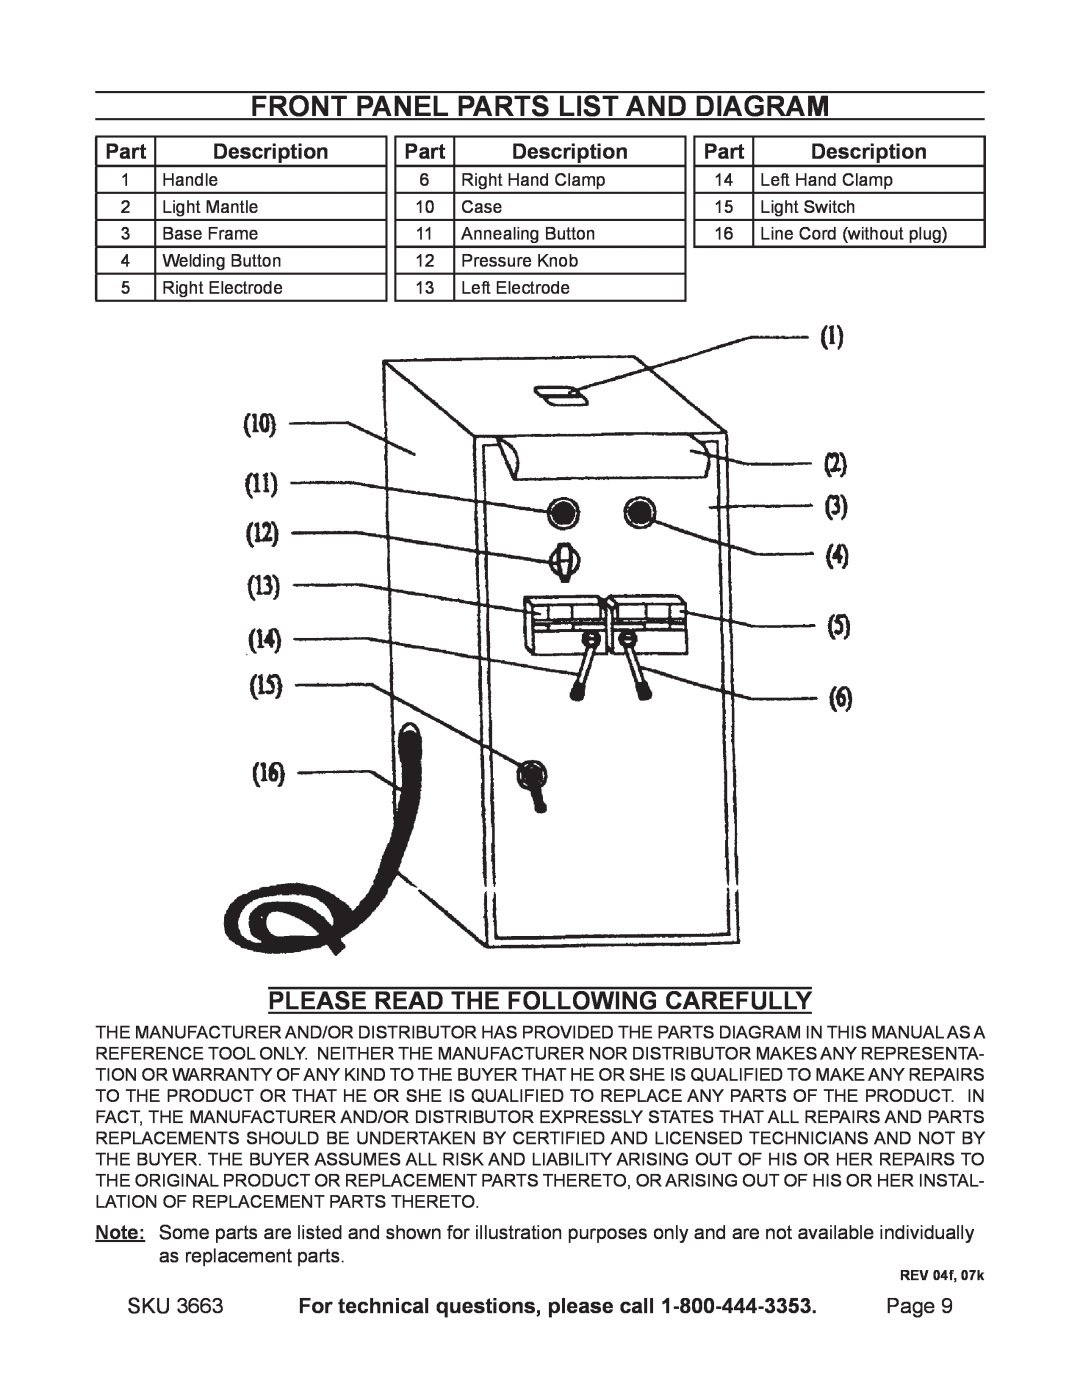 Chicago Electric 3663 Front Panel Parts List and Diagram, Please Read The Following Carefully, Description, Page 